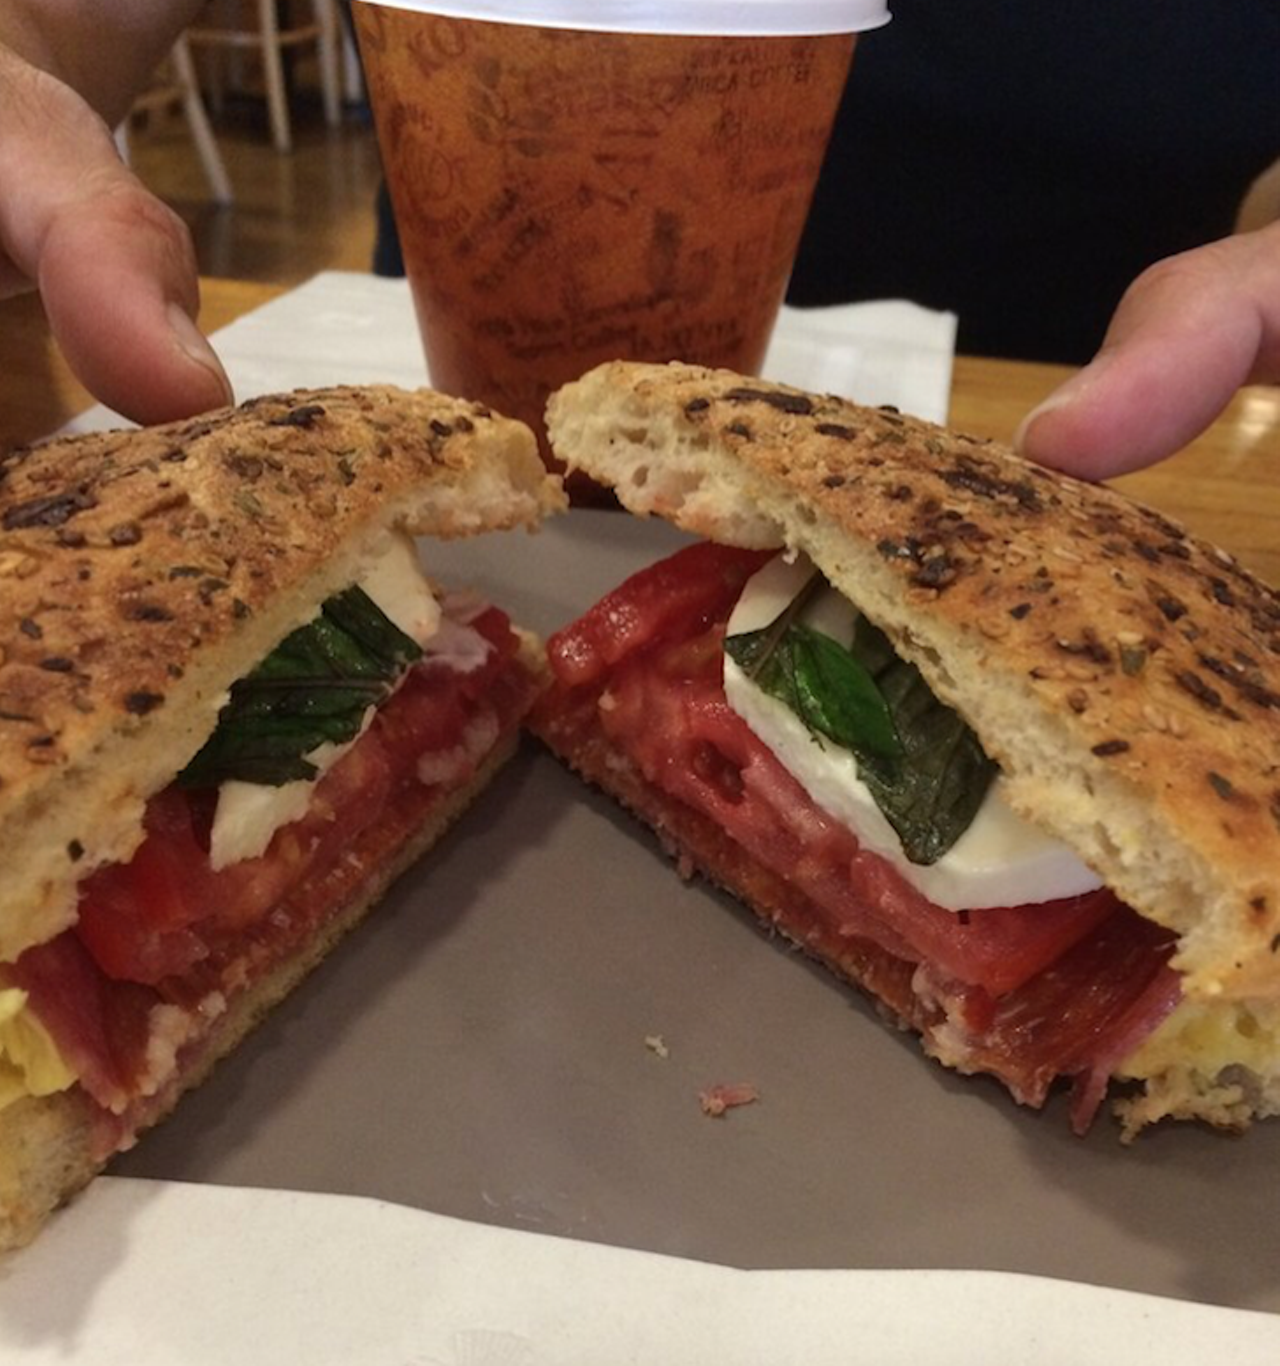 Java Lava
47 E. Robinson St., 407-770-1888
Nothing on the wide menu of sandwiches, salads and more breaks $10, but our favorite is the basil, mozzarella and tomato panini ($7.30), pressed with aioli and balsamic vinegar.
Photo via Luz V./Yelp